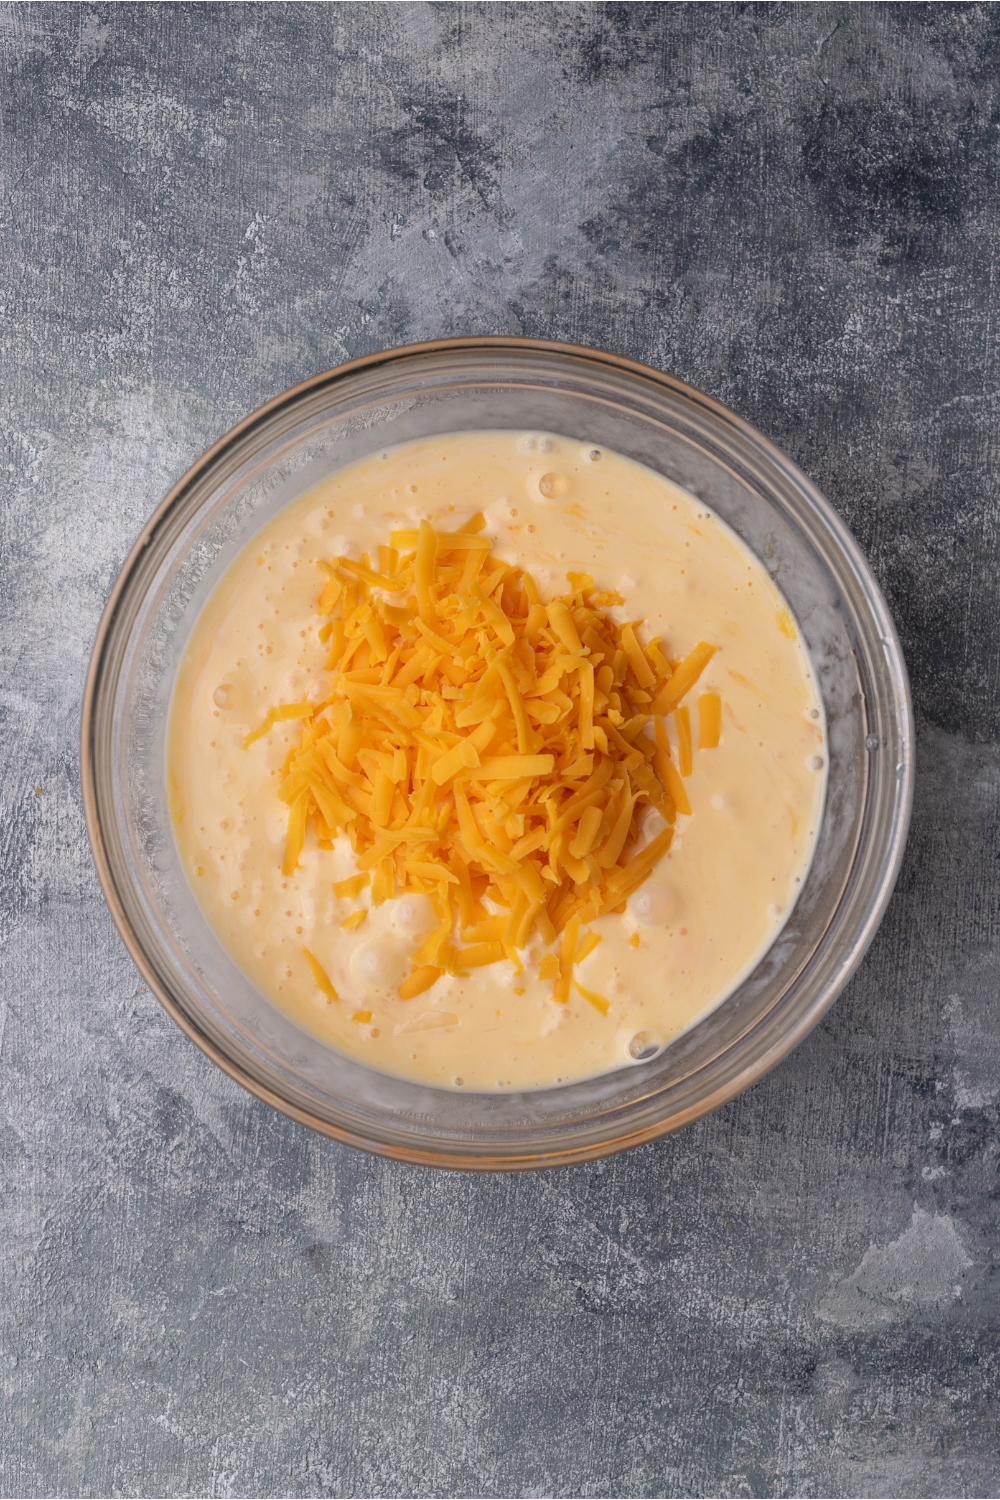 A clear bowl with beat eggs, cream, and cheese freshly added.